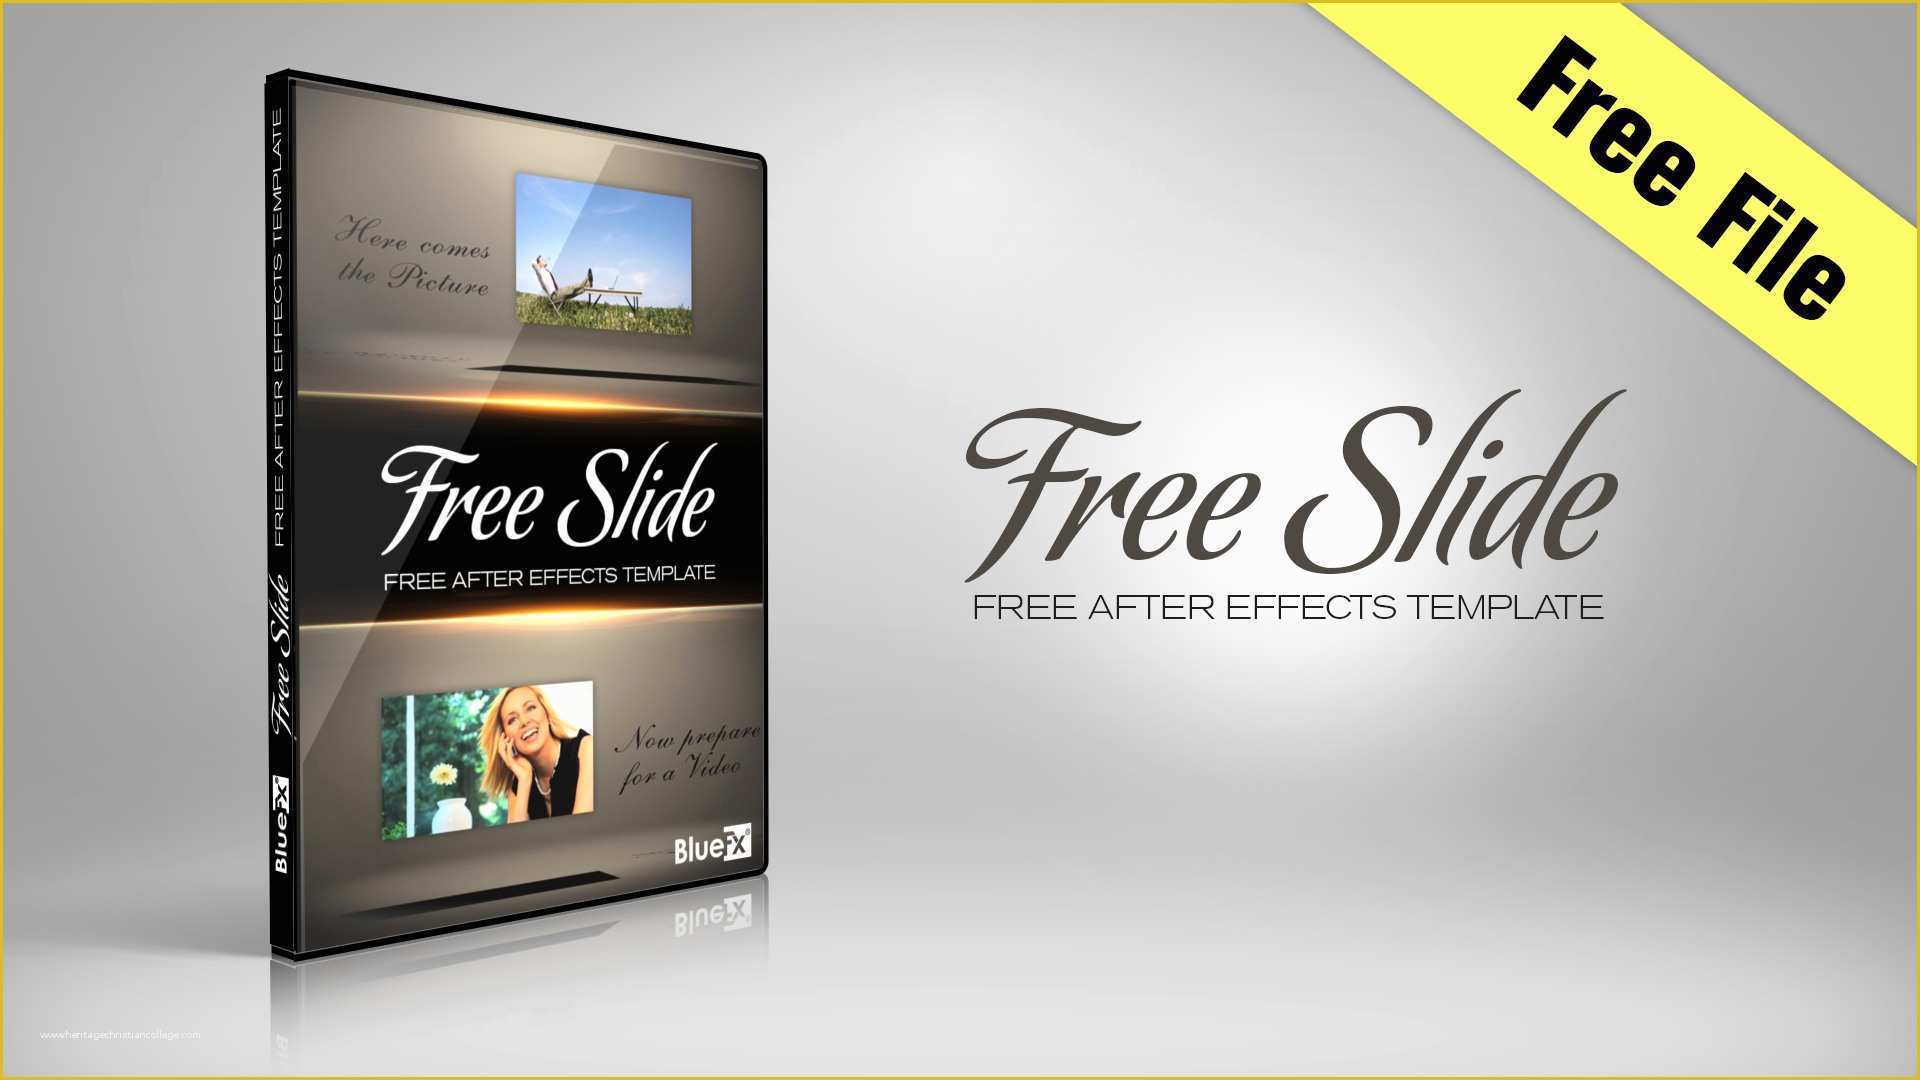 After Effects Simple Slideshow Template Free Of after Effects Slideshow Template Free